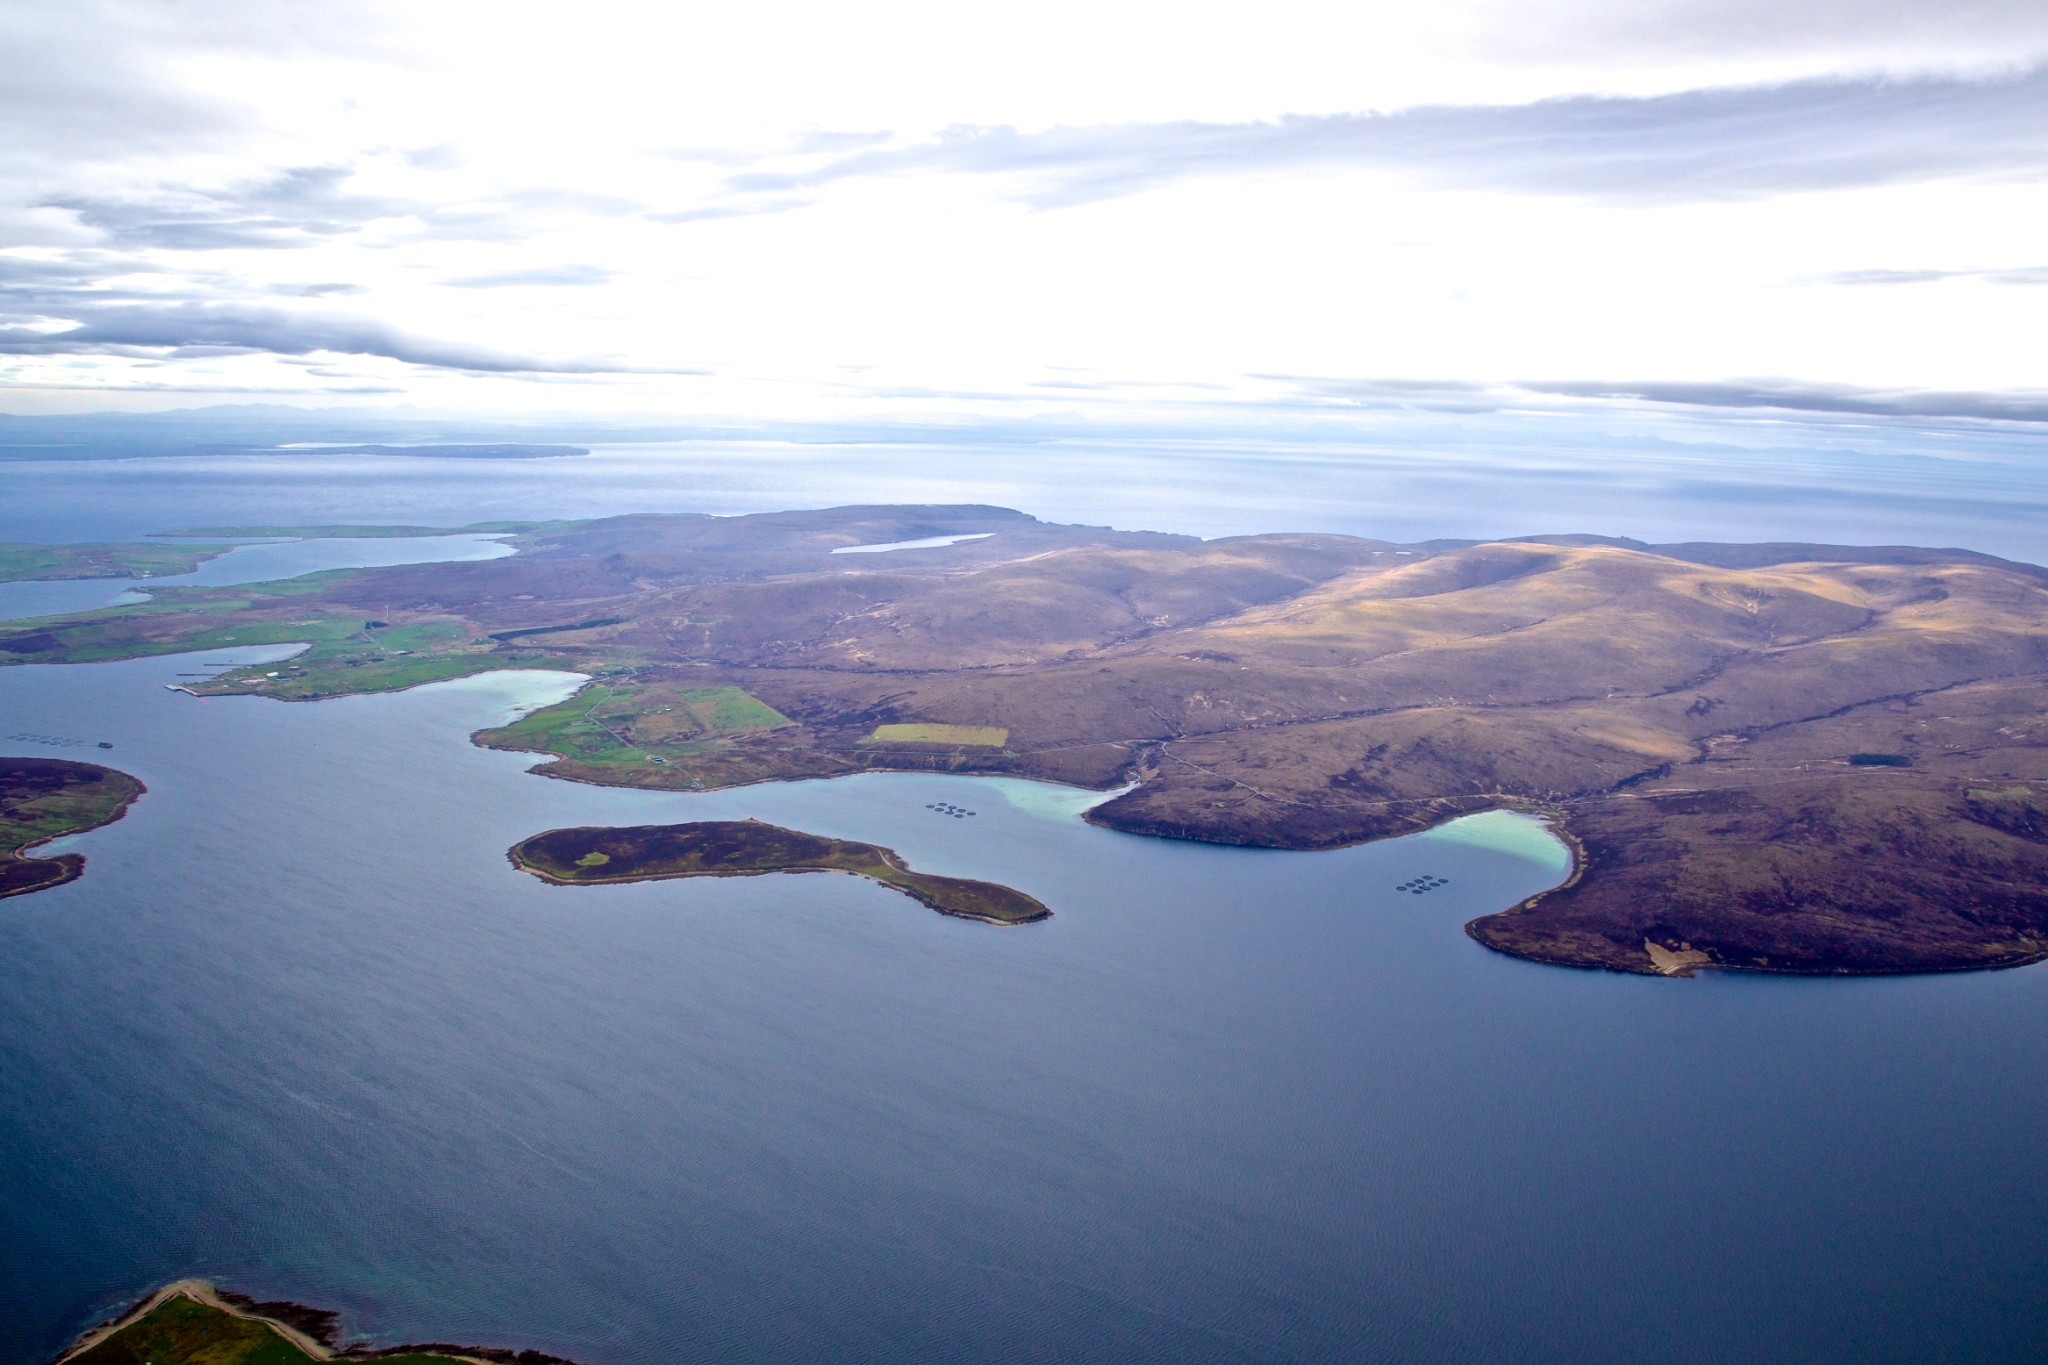 View over Scapa Flow towards Hoy, Orkney - image by Colin Keldie